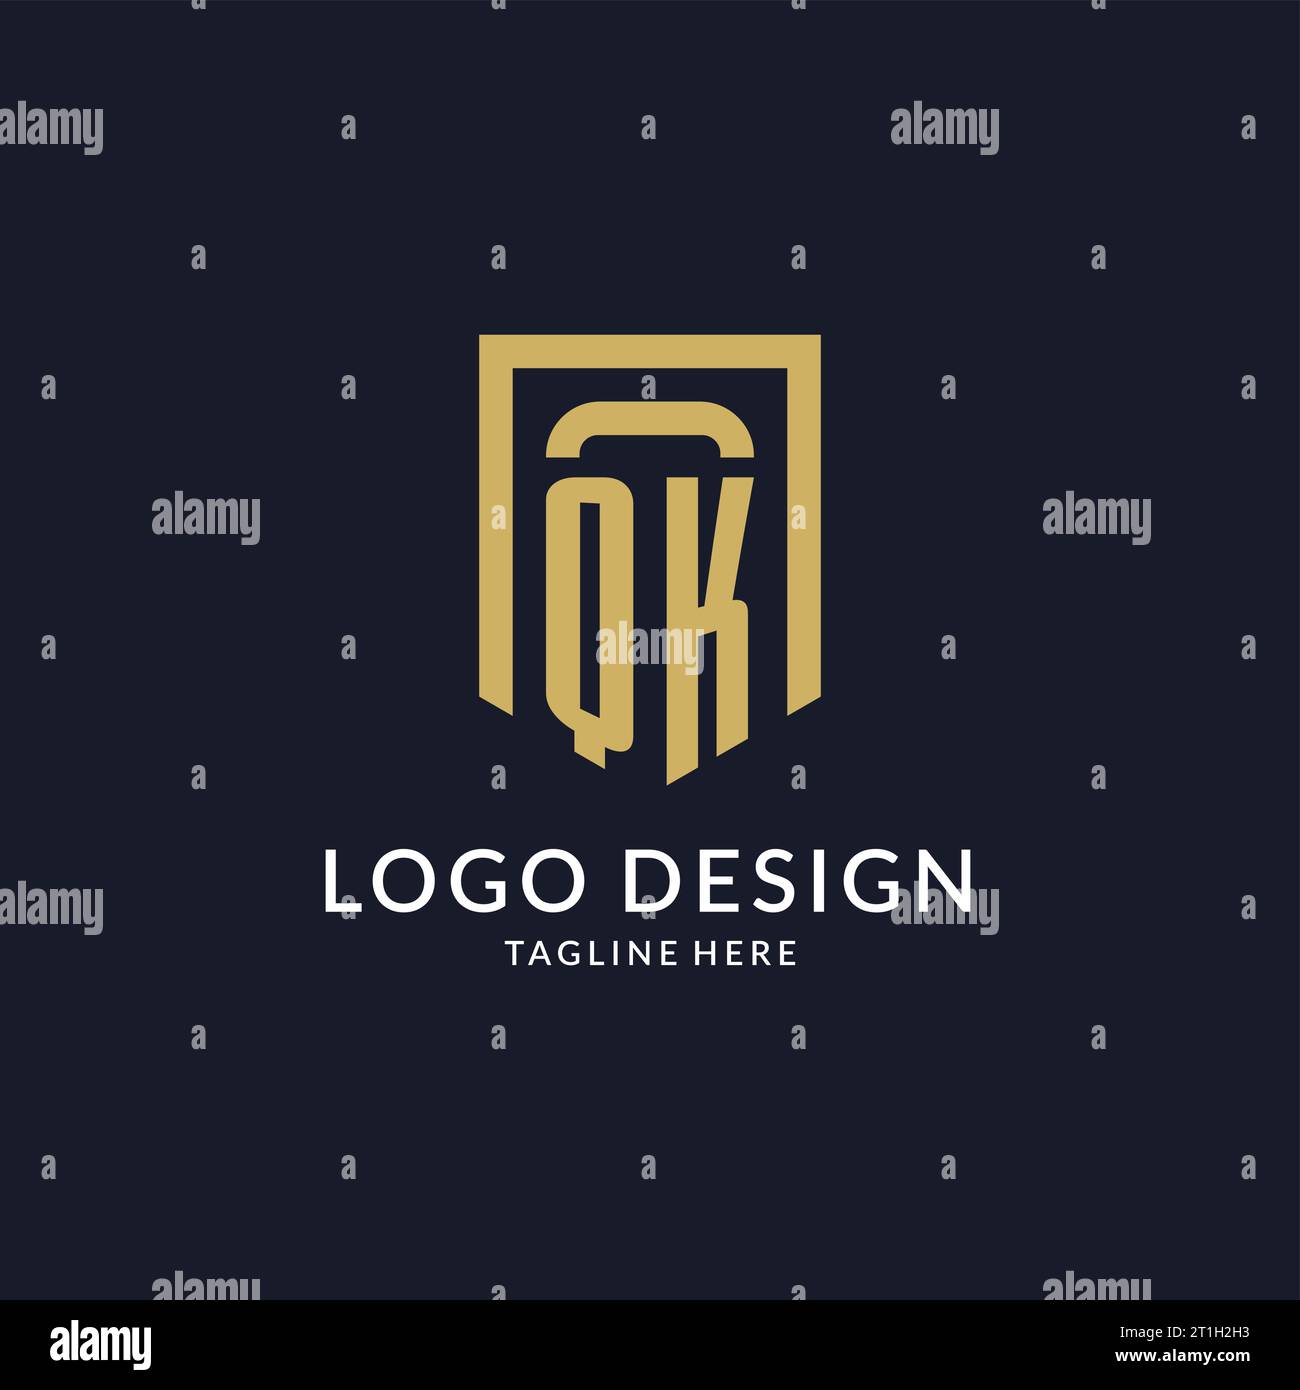 QK logo initial with geometric shield shape design style vector graphic Stock Vector